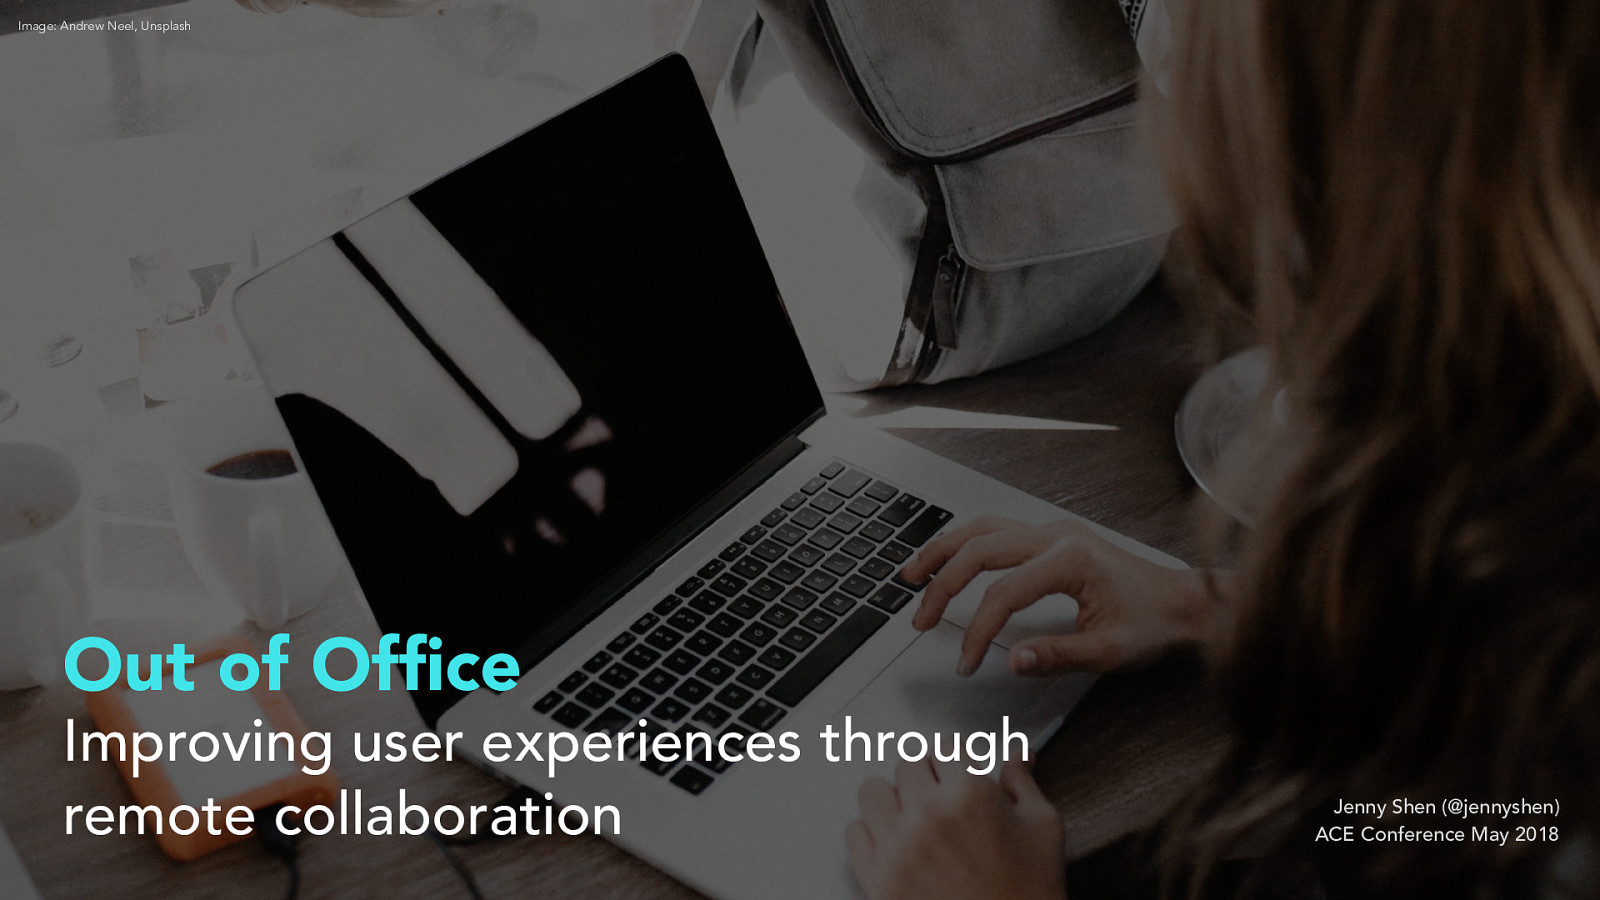 Out of Office: Improving user experiences through remote collaboration